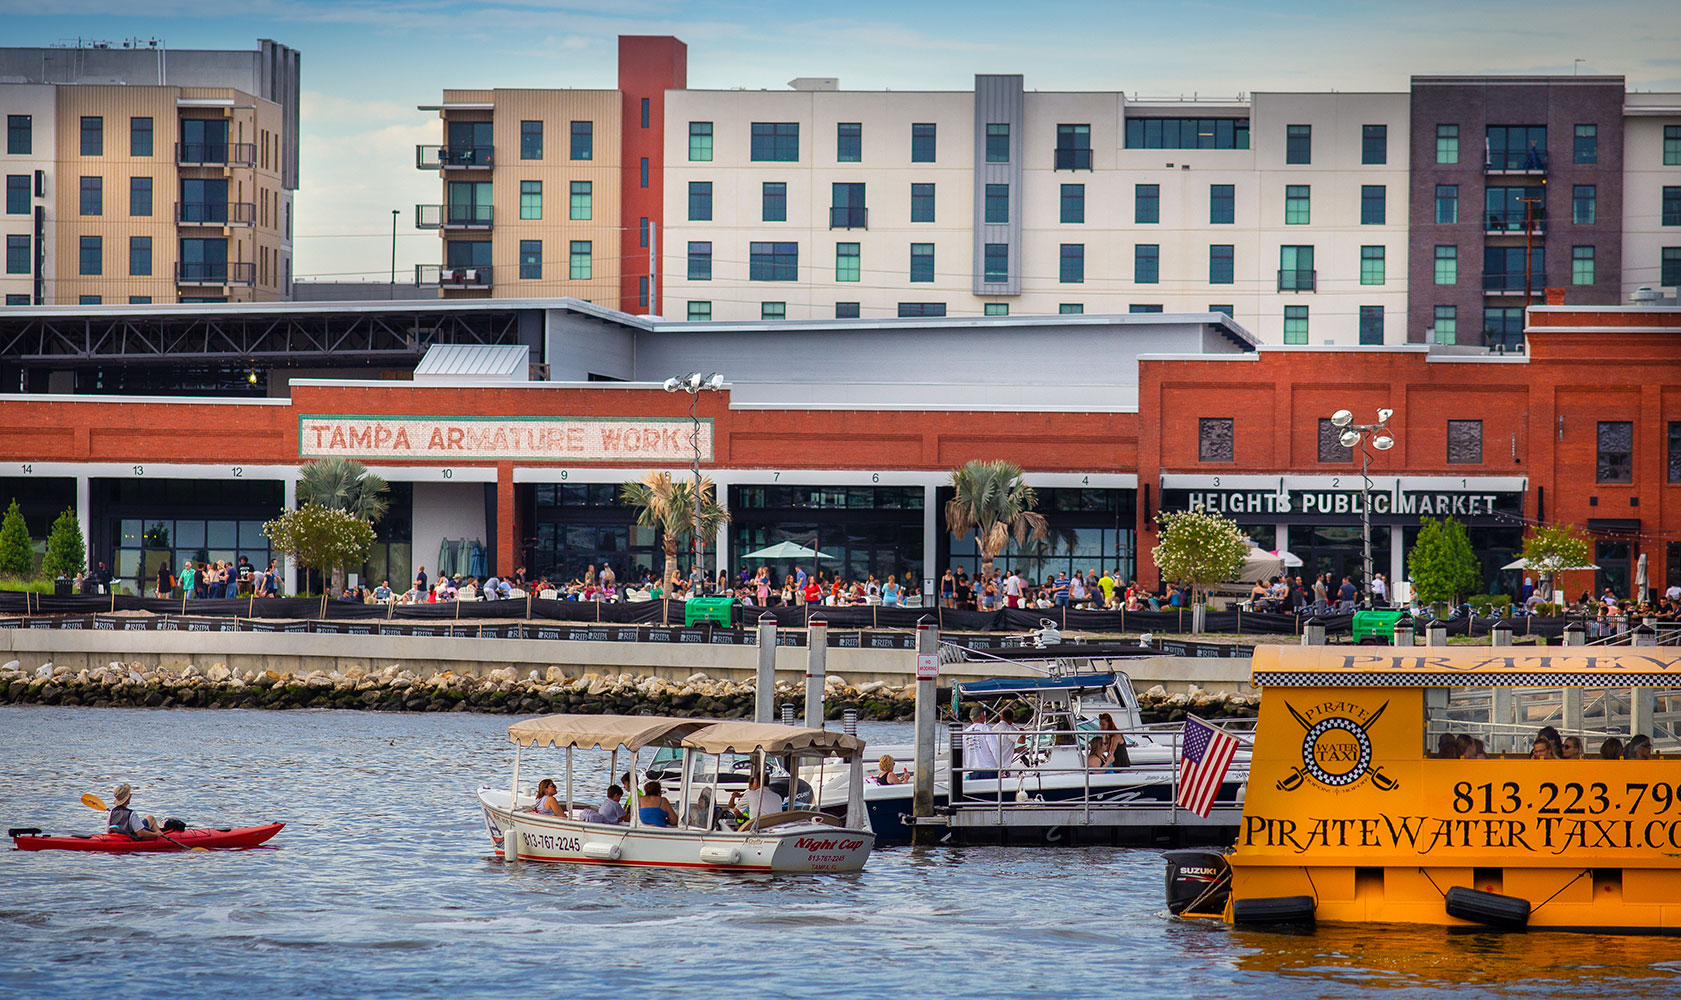 The Tampa Riverwalk - An Overnight Success 40 Years In The Making